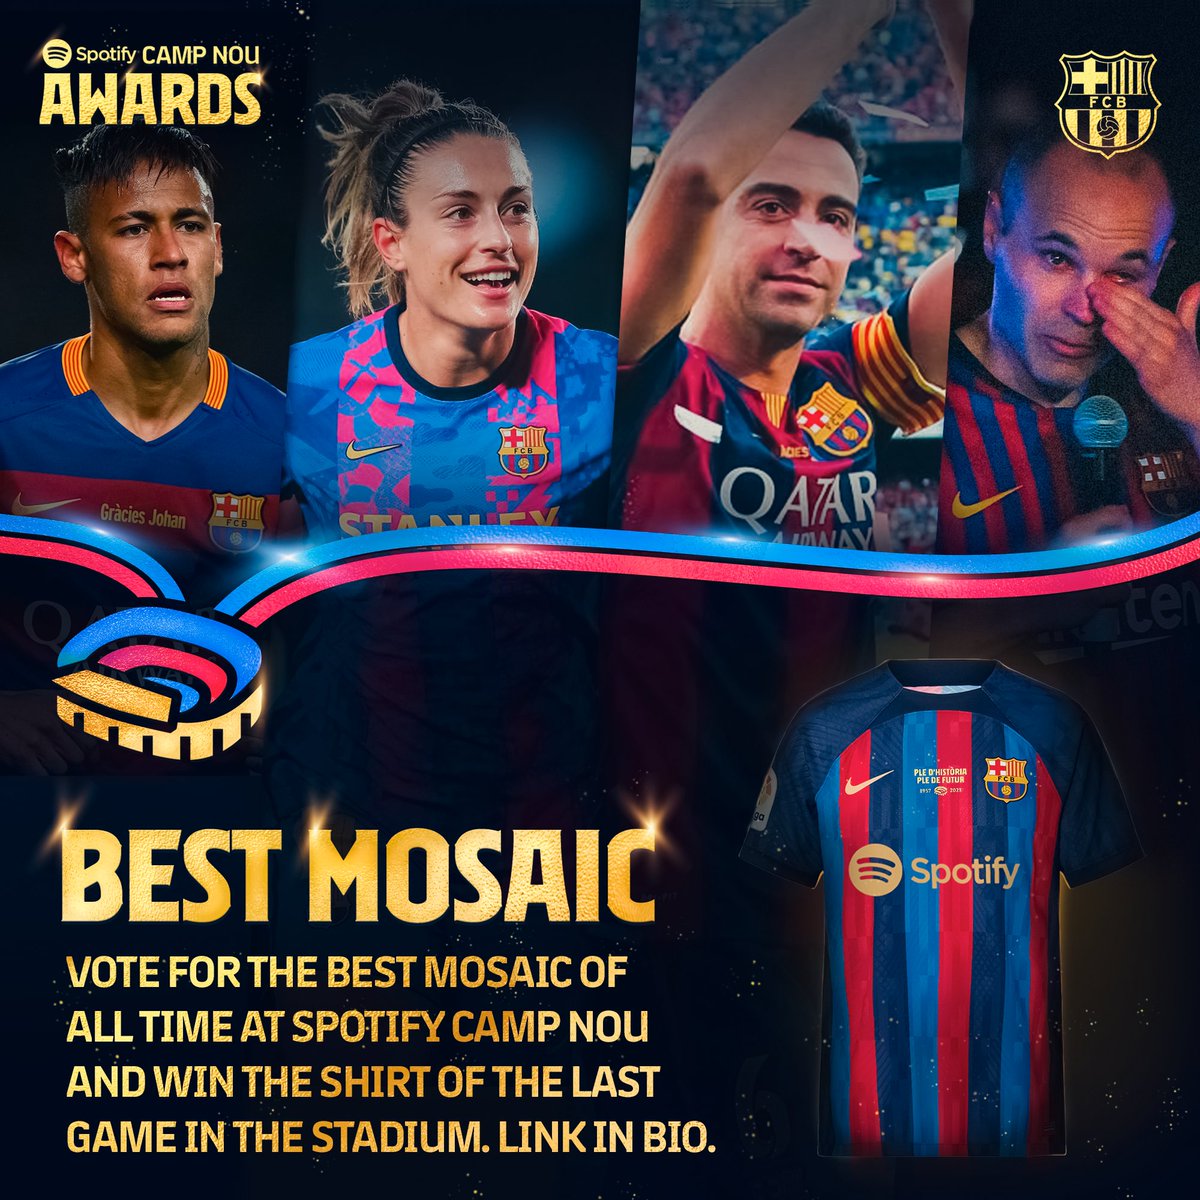 🏆 The Spotify Camp Nou AWARDS continue!

Here are the nominees for 𝐁𝐄𝐒𝐓 𝐌𝐎𝐒𝐀𝐈𝐂: